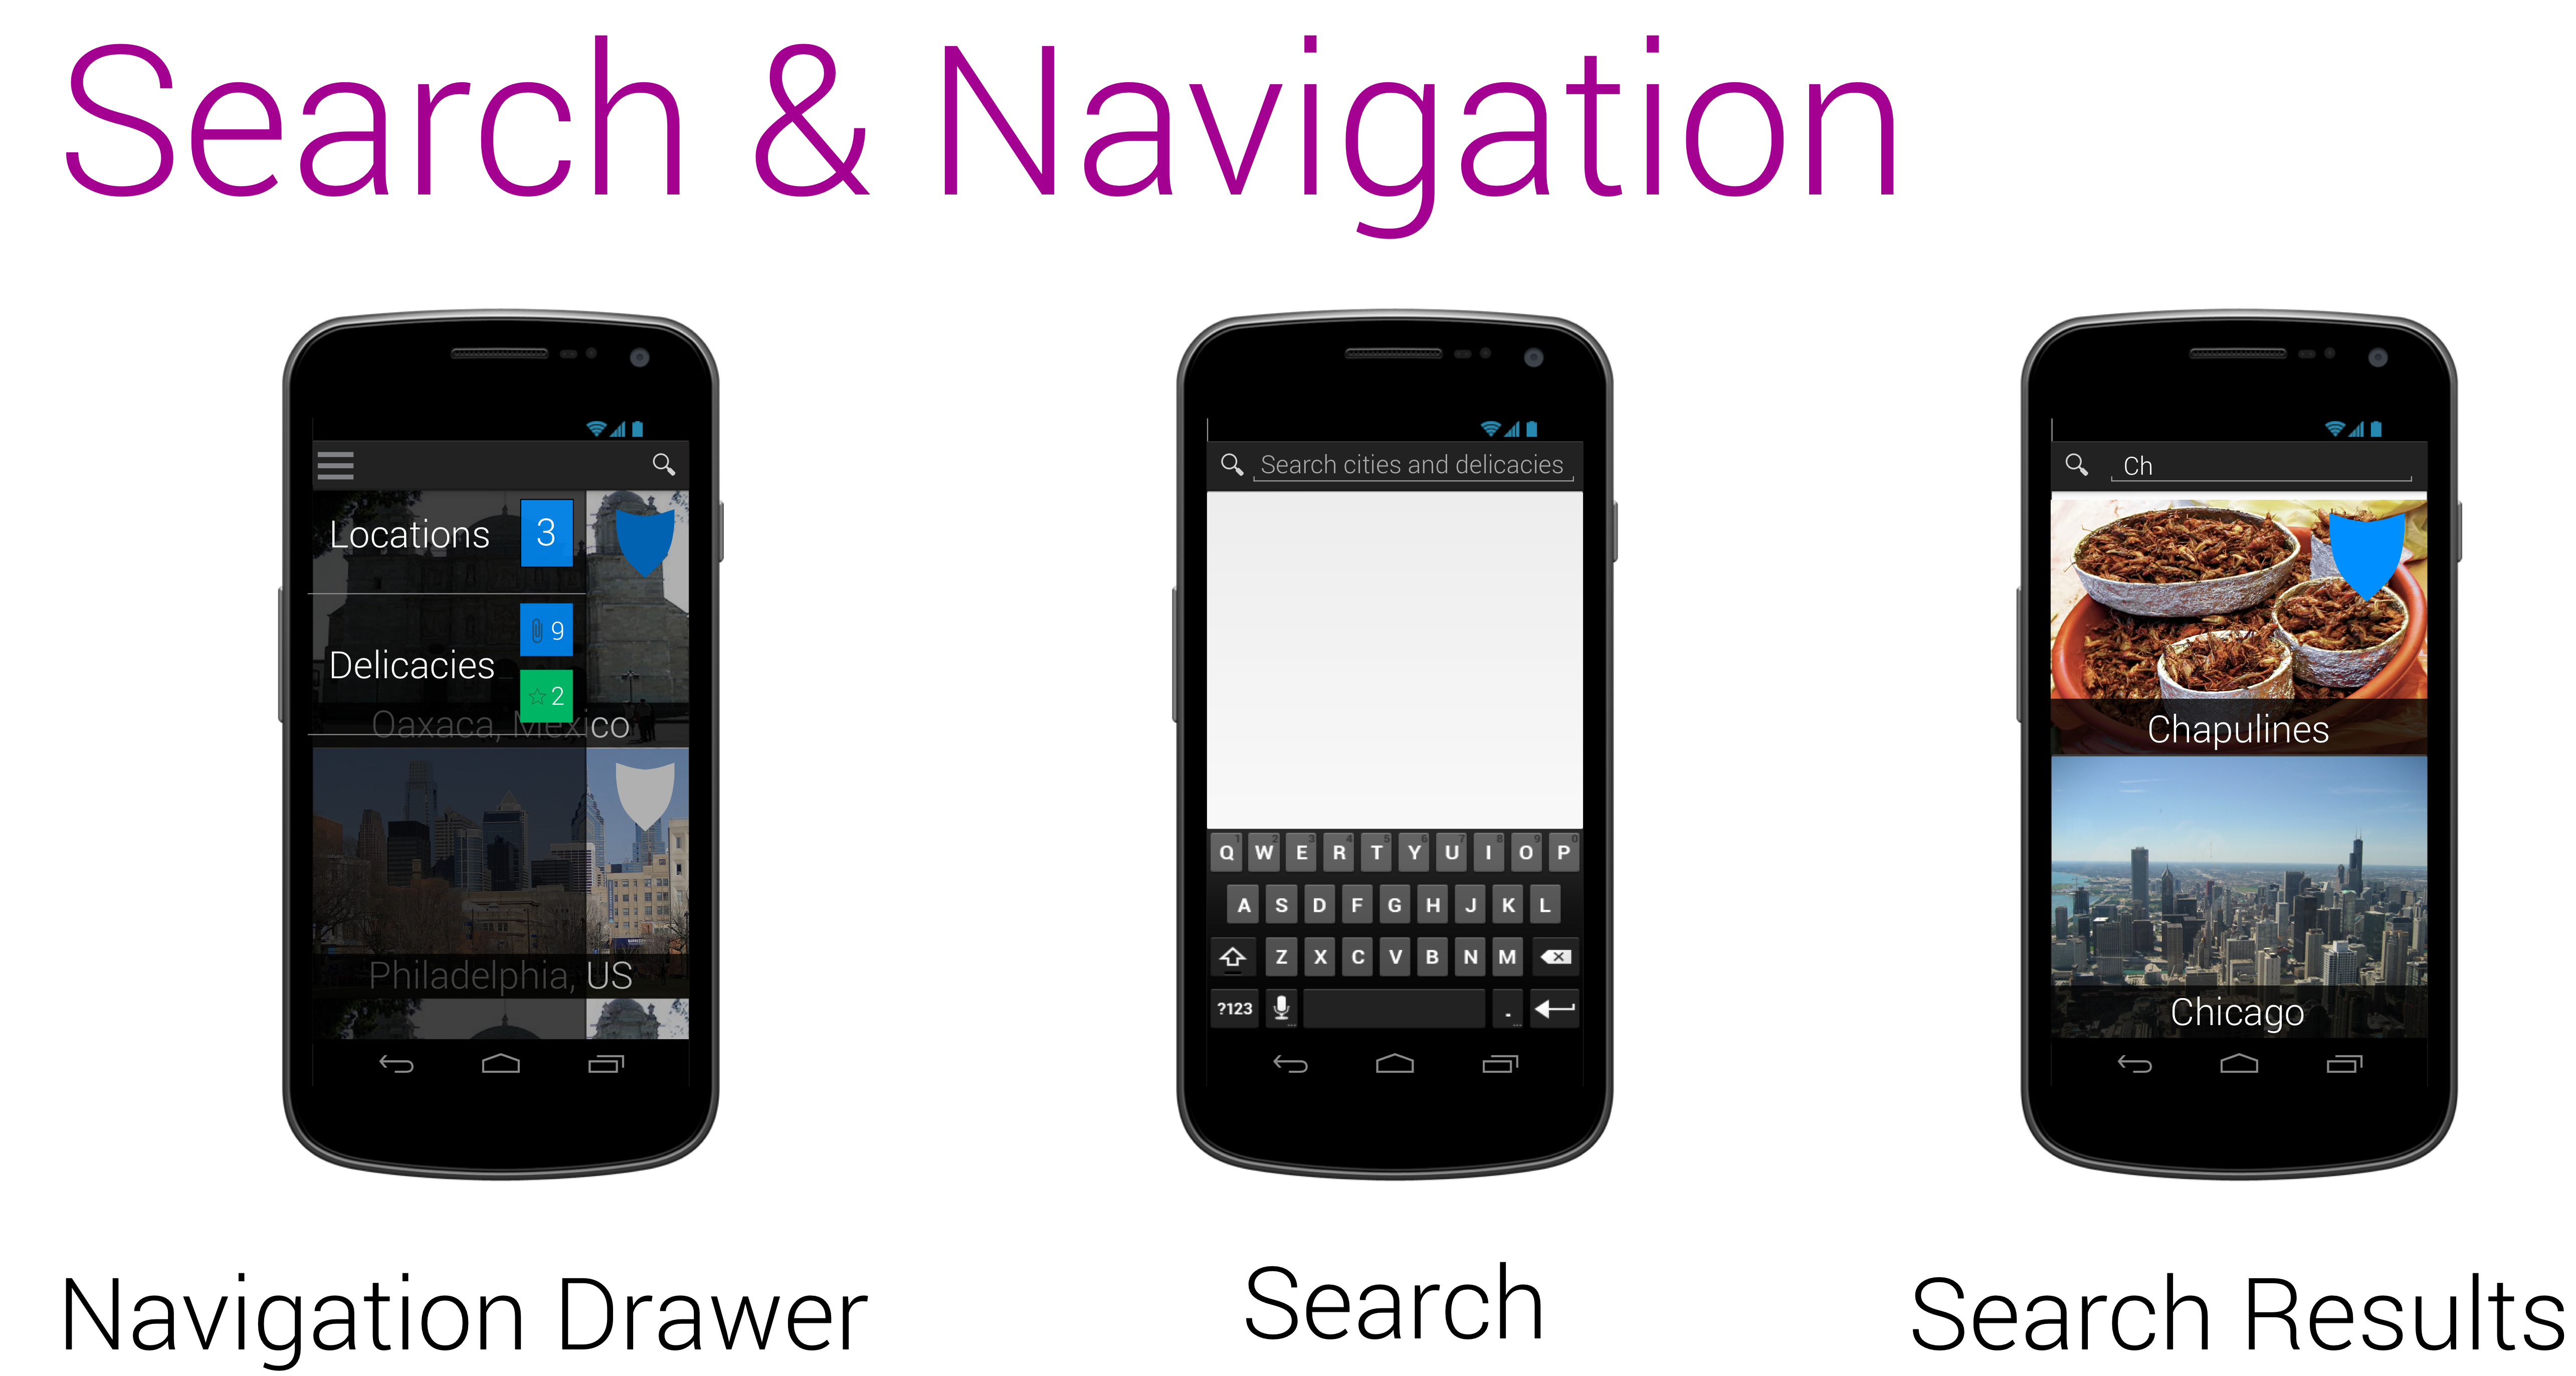 Search and Navigation